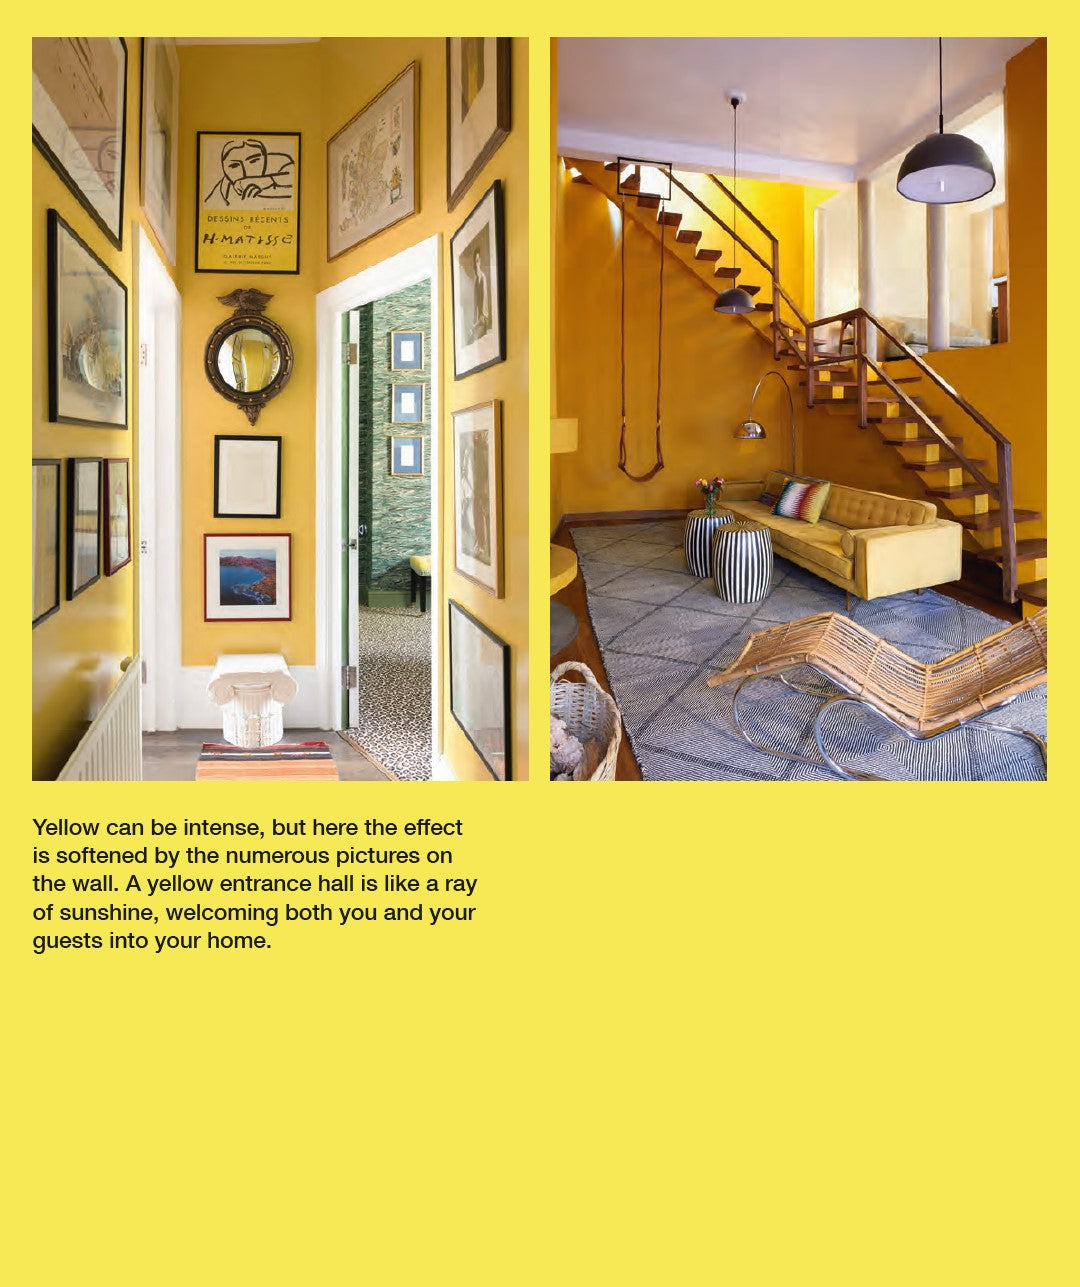 The Complete Book of Colourful Interior